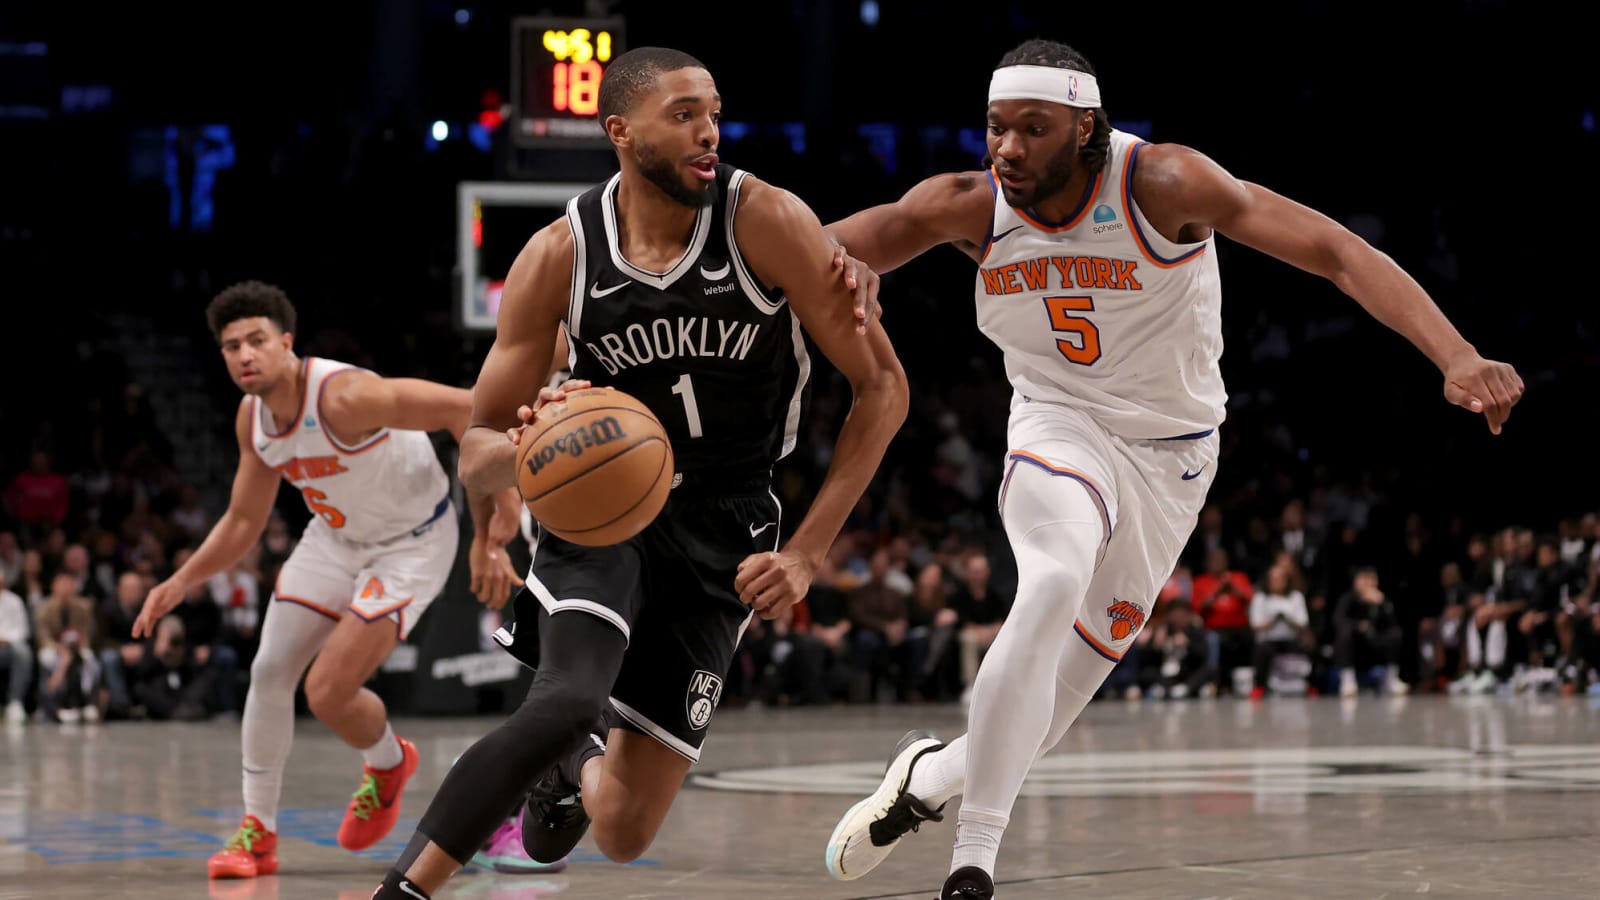 Watch: Nets’ Mikal Bridges gets heavily booed on his home court despite ground-breaking 36-point outing against the Knicks